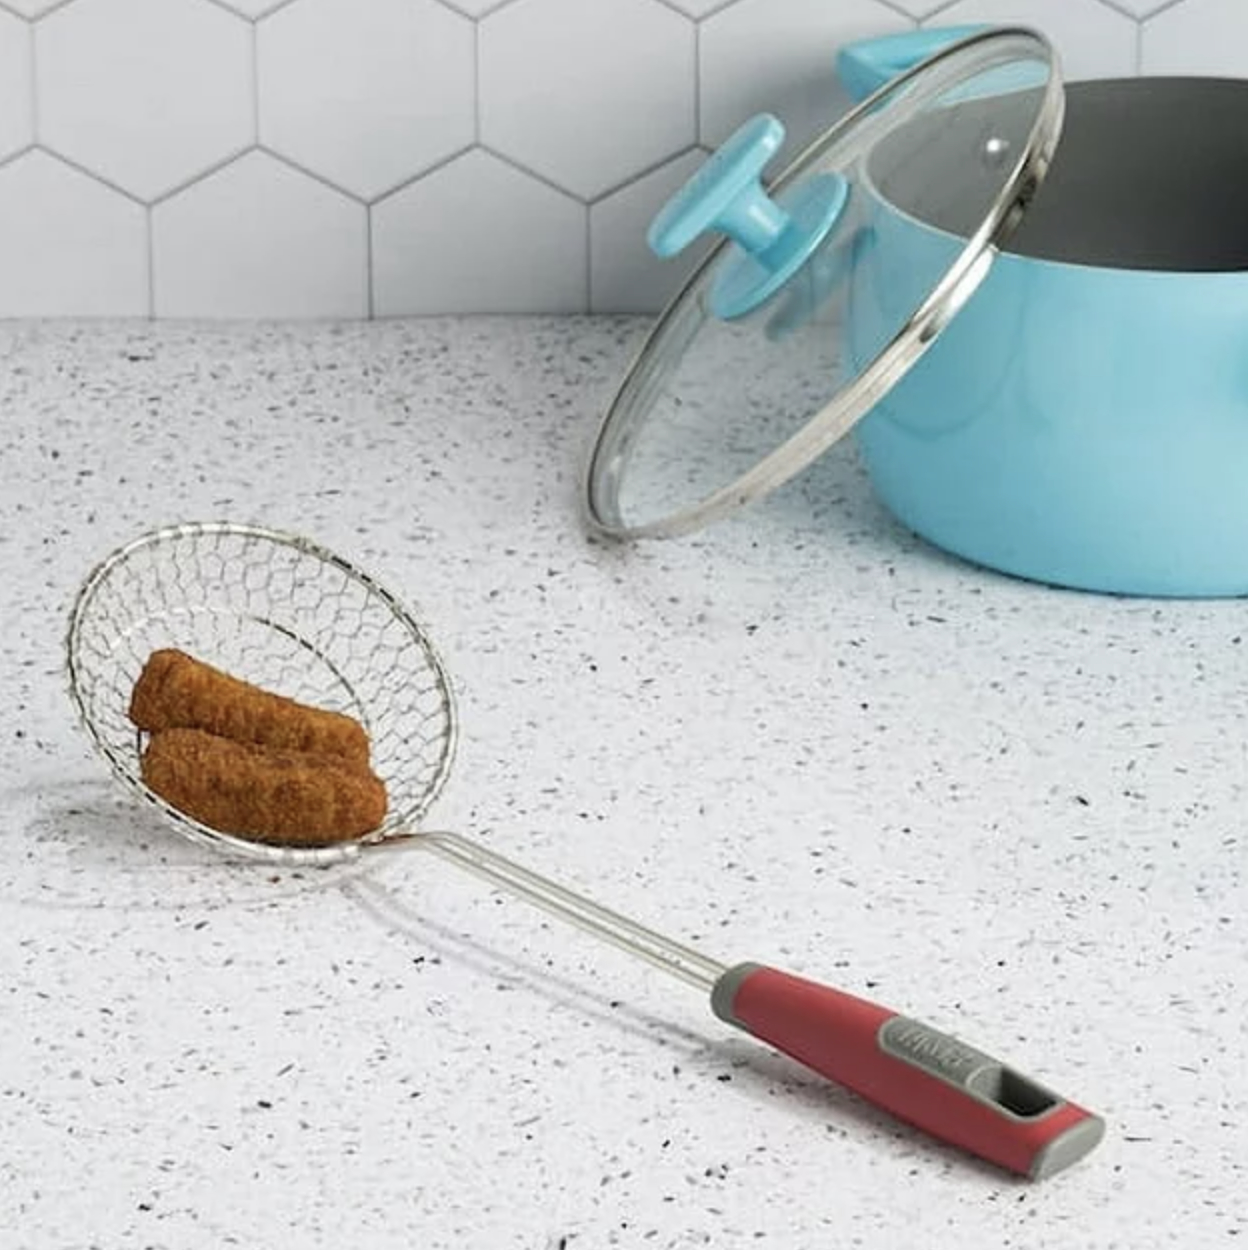 The steel skimmer spoon resting on countertop with fried mozzarella sticks in basket of spoon